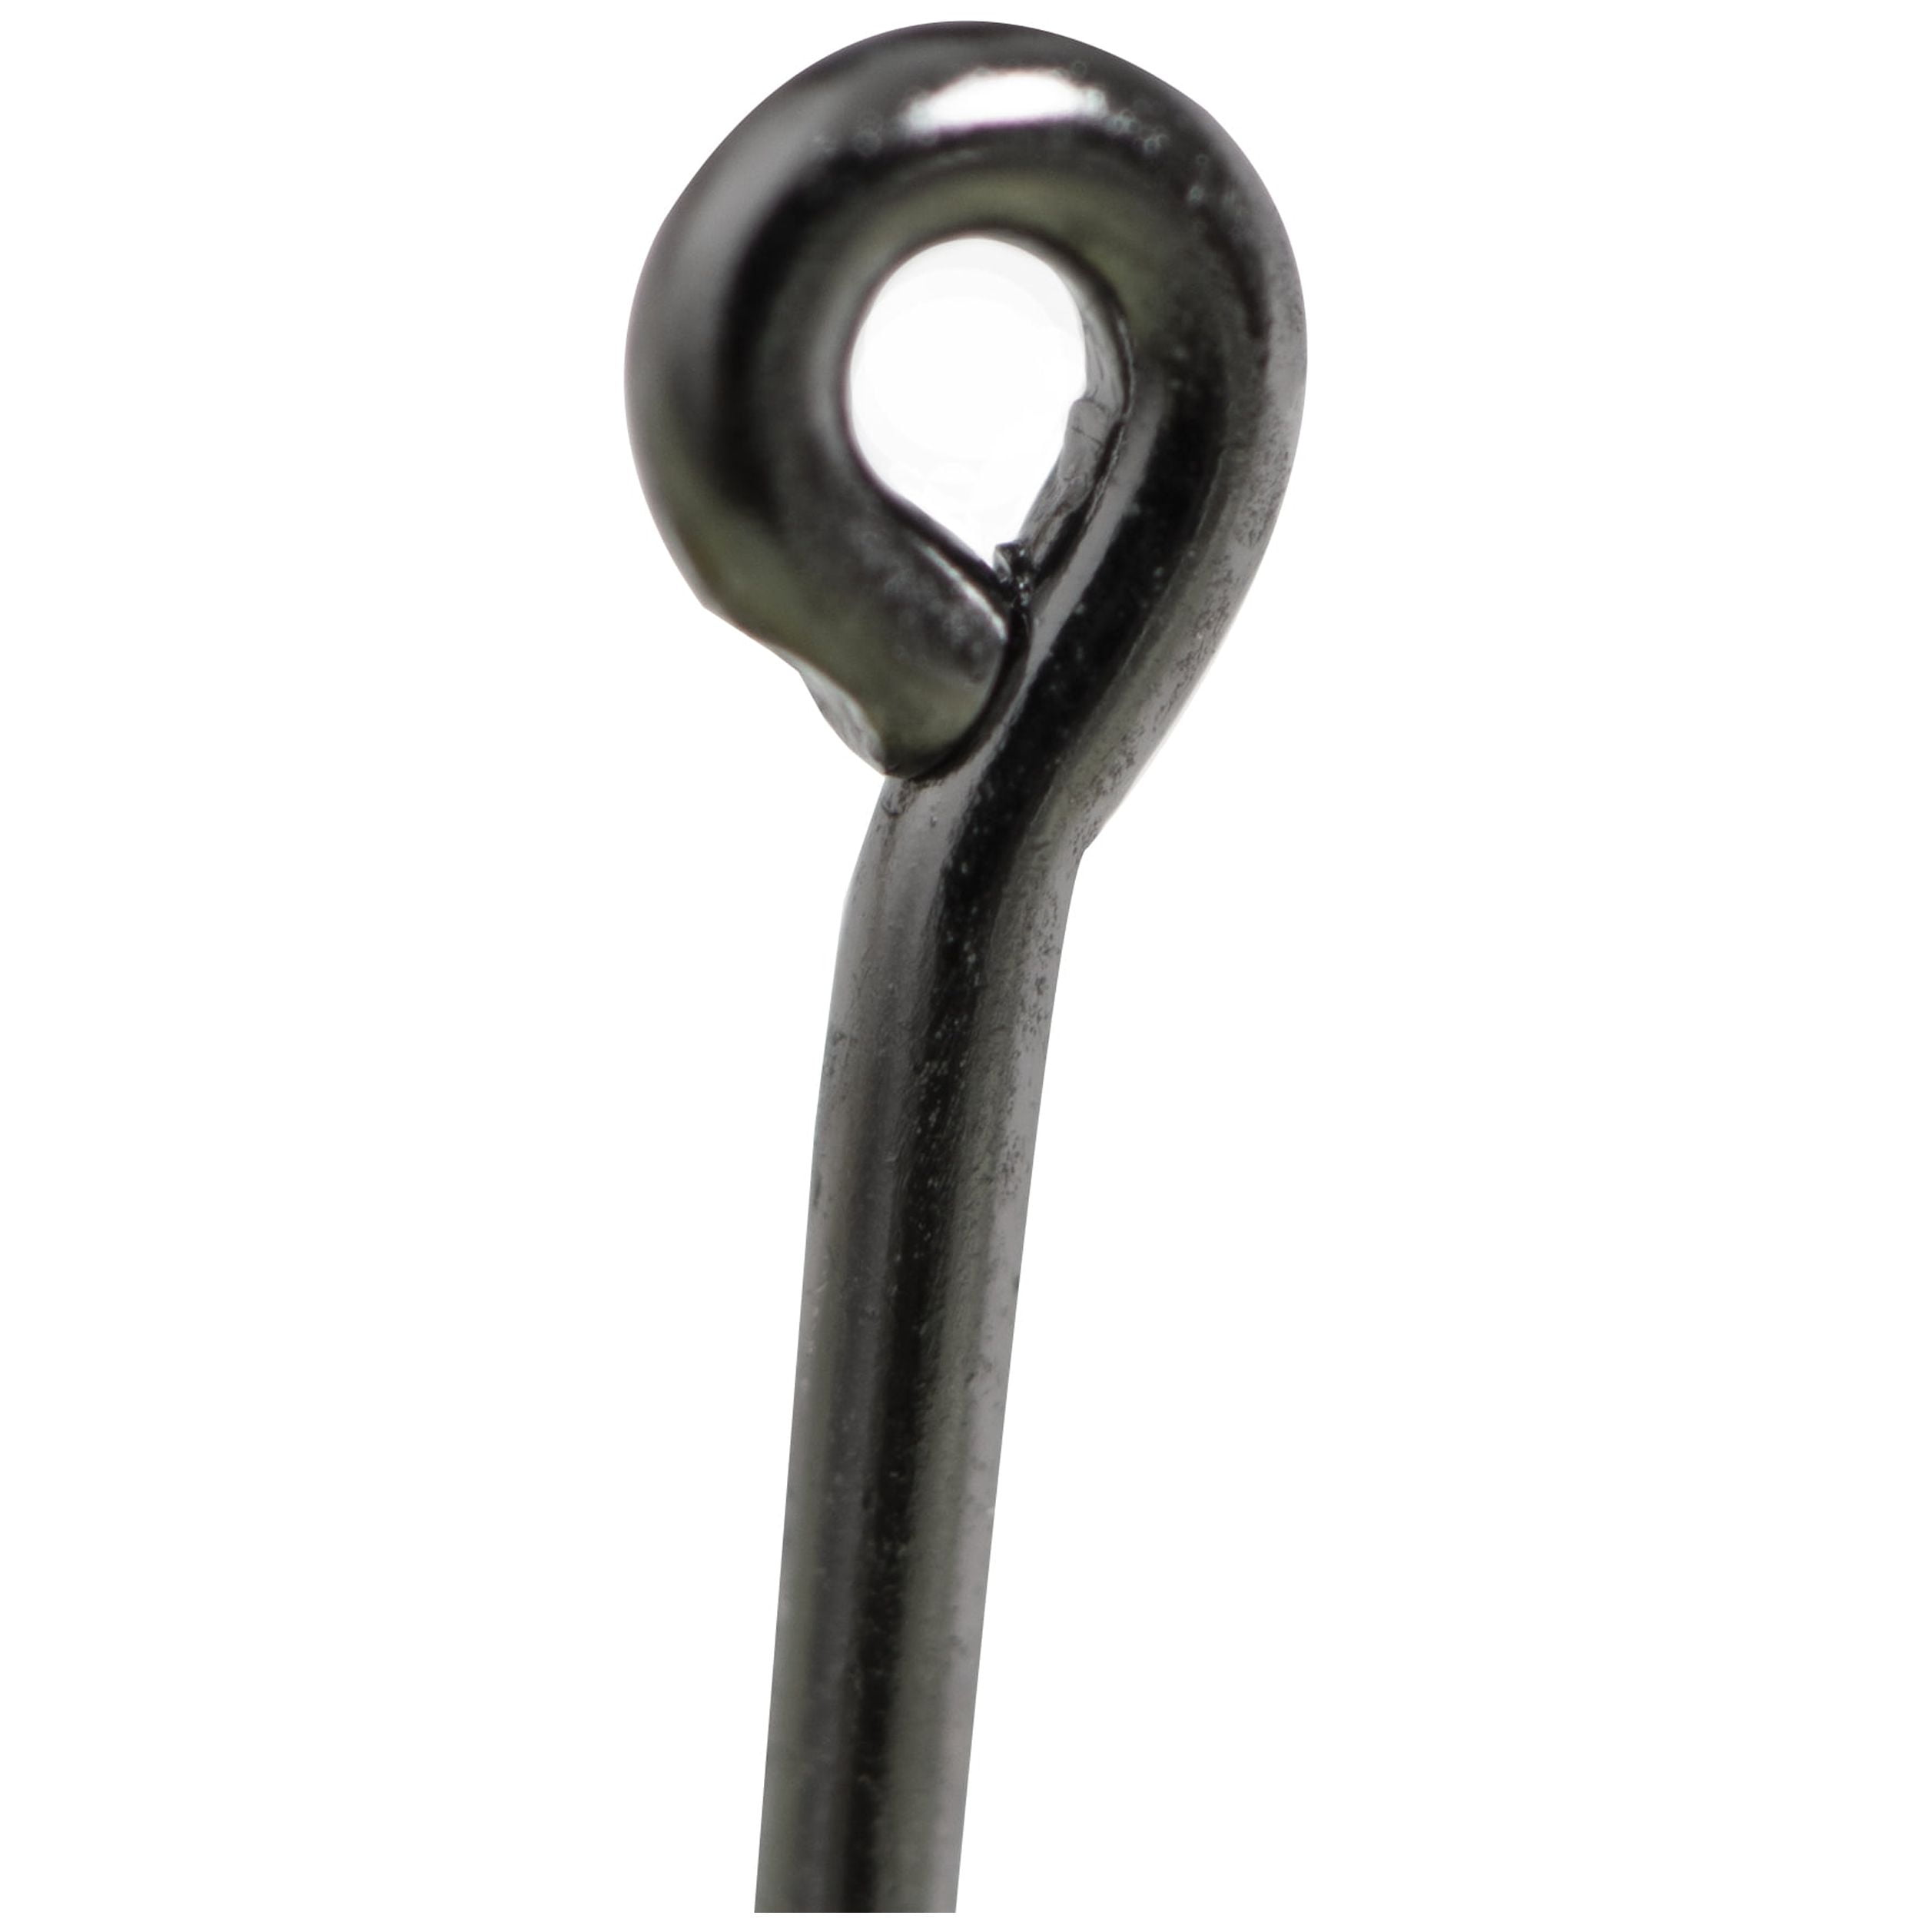 Mustad in-line Demon Perfect Circle Hook (Black Nickel) - Size: 3/0 10pc 